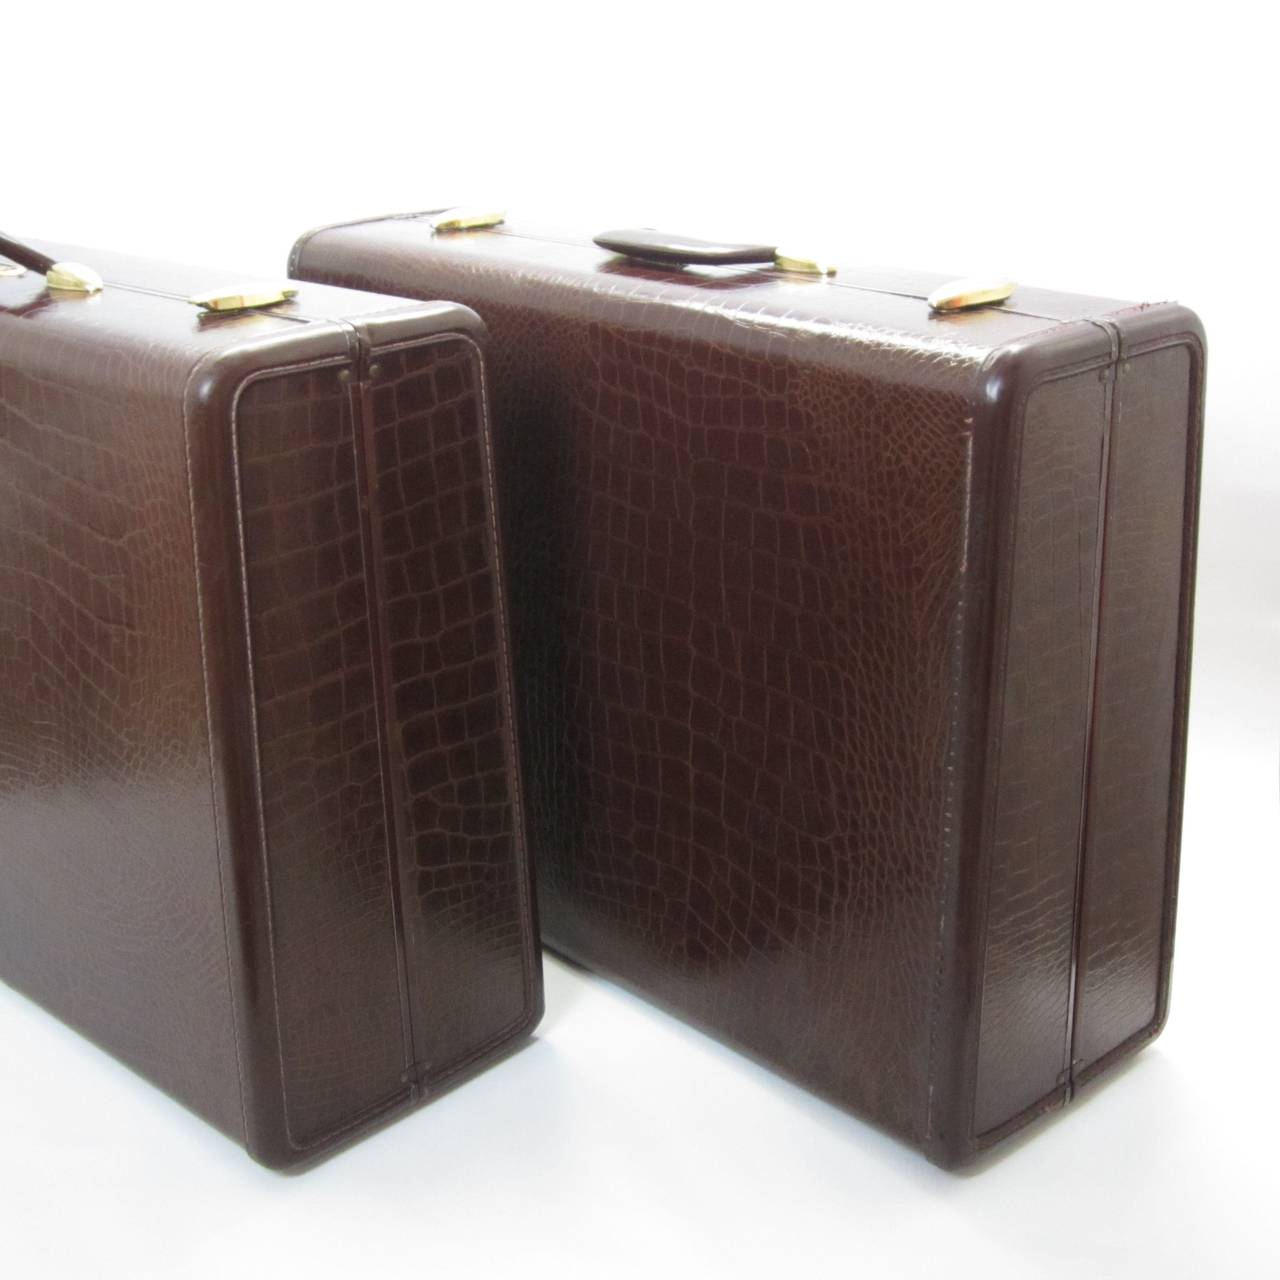 Two leather suitcases in embossed-crocodile leather with brass appointments. Super clean interior and barley used--no scent. Great for chic travels, storage display in bedroom/living room, props, etc. Sold as a pair.